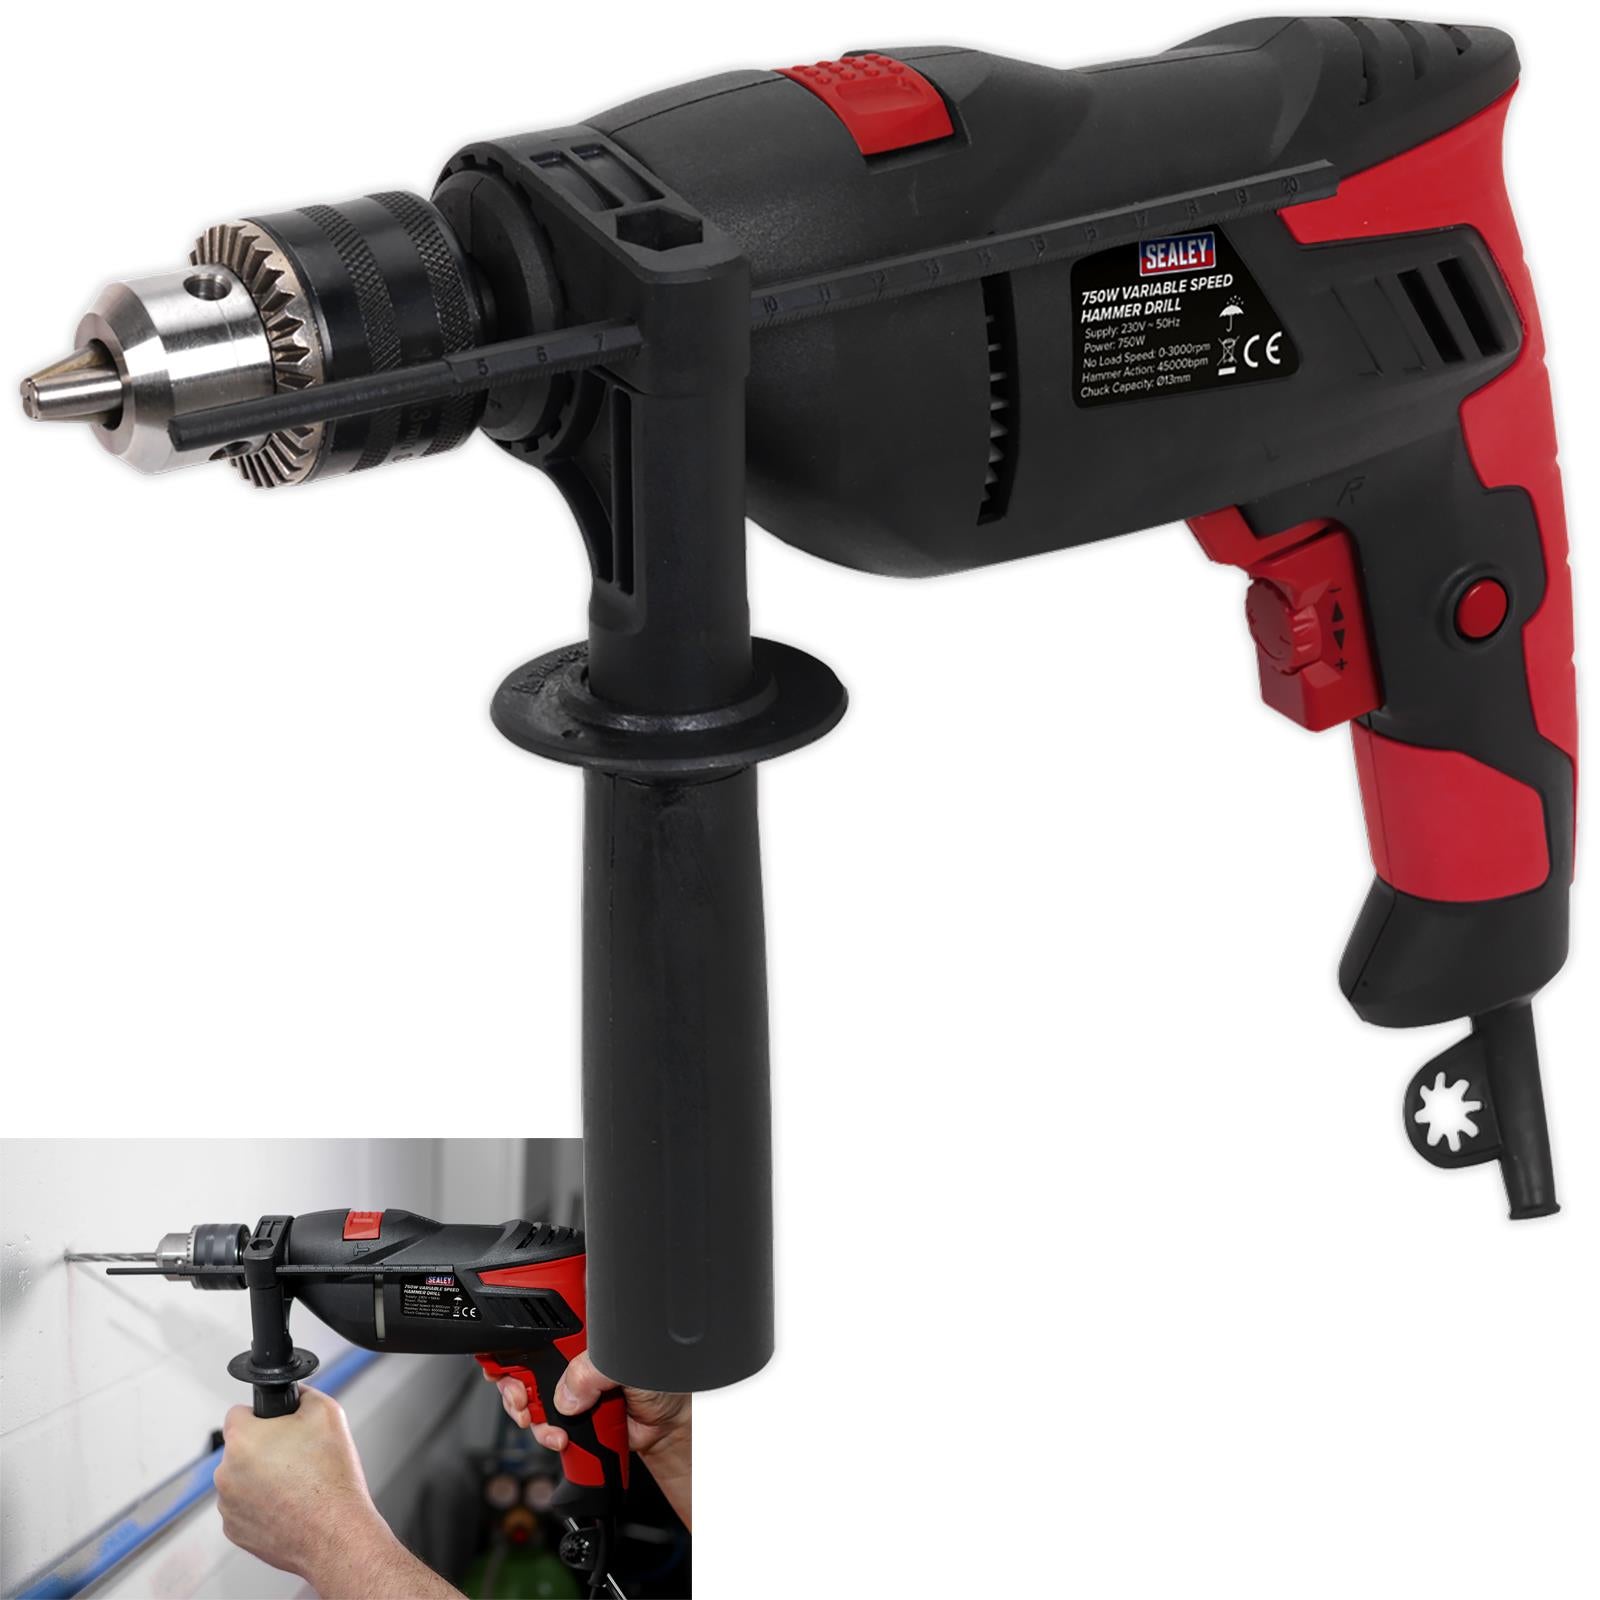 Sealey 750W Variable Speed Corded Hammer Drill 13mm Chuck  Remover Screws